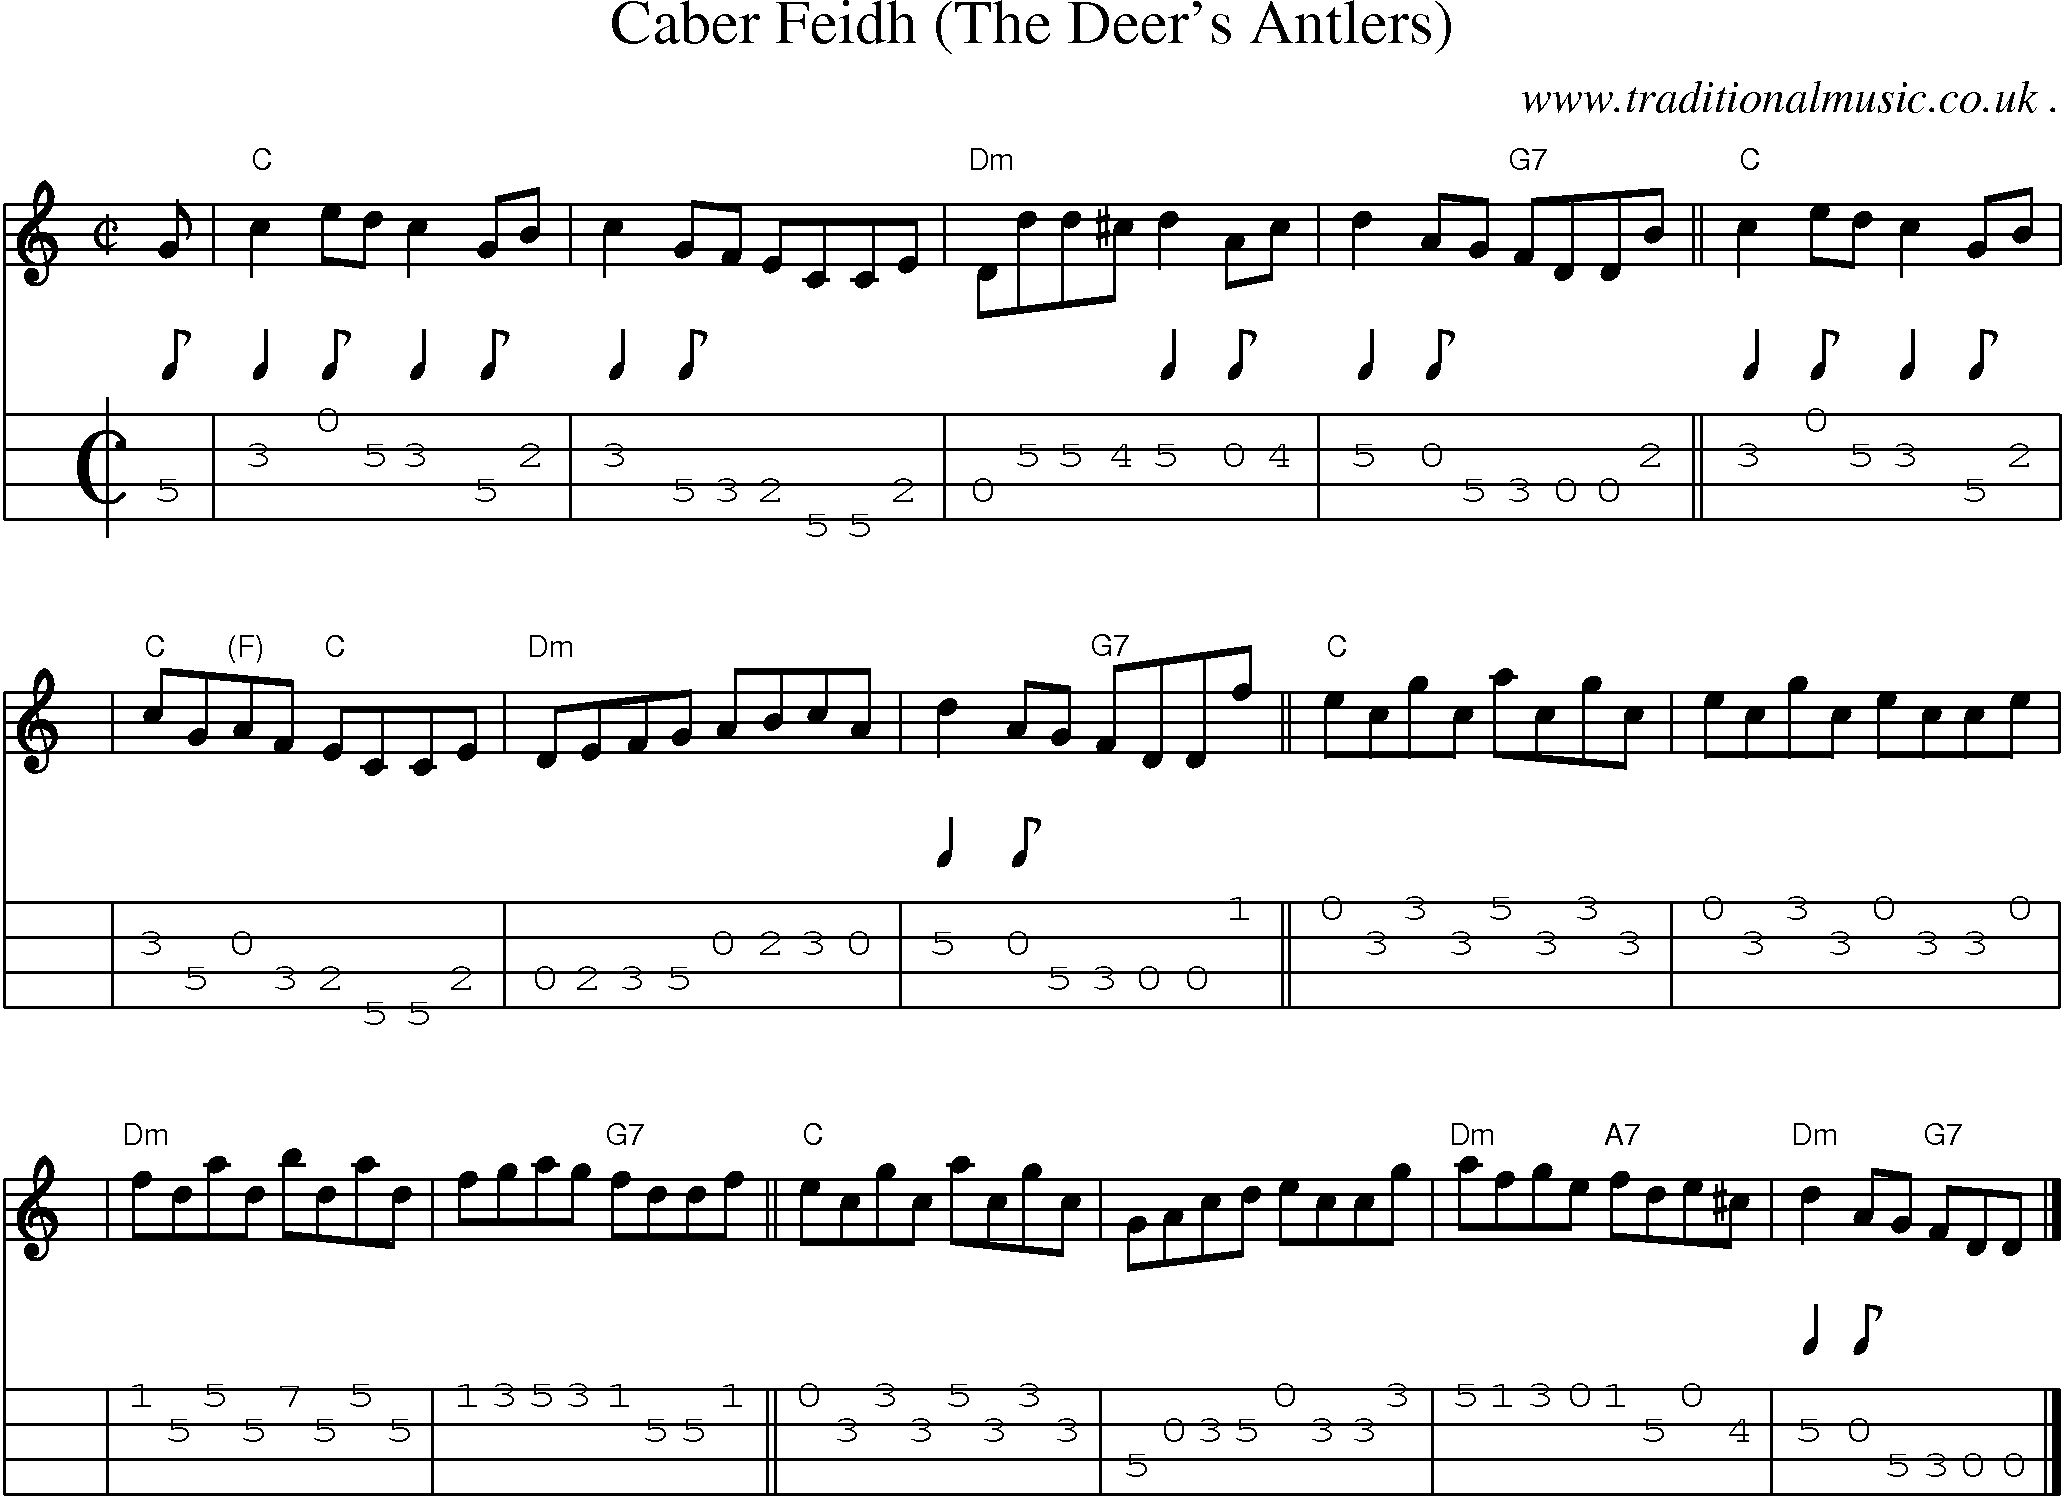 Sheet-music  score, Chords and Mandolin Tabs for Caber Feidh The Deers Antlers